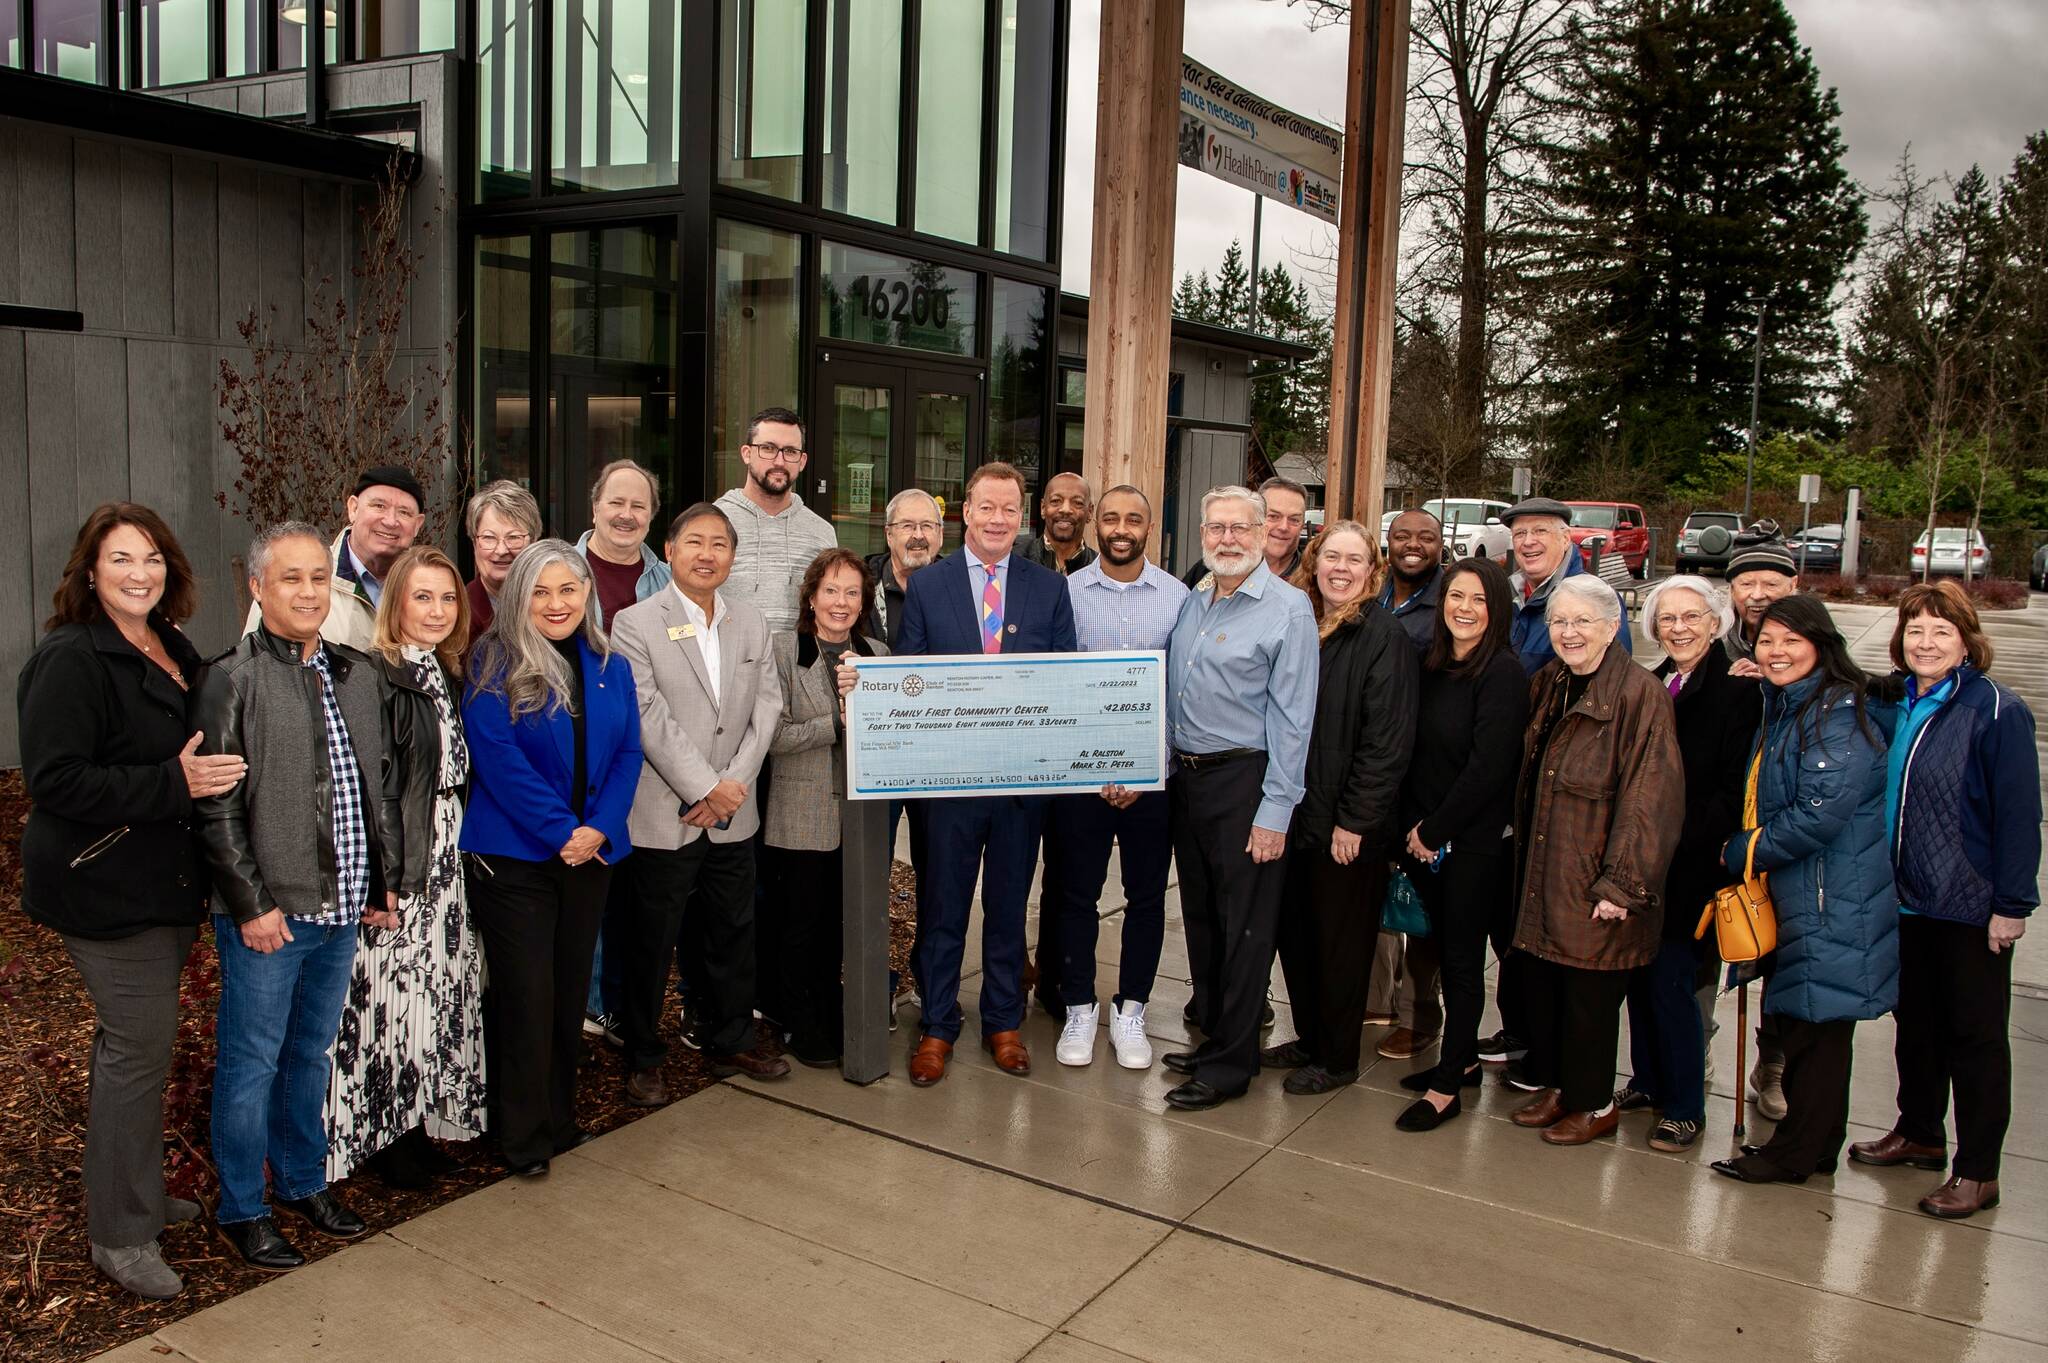 Photo courtesy of Bruce Hudson
Former Seattle Seahawks player Doug Baldwin received a check last month for $42,805 from the Renton Rotary Club. Thanks to the club’s donation, all senior programming during senior times is free during the winter session at the Family First Community Center.